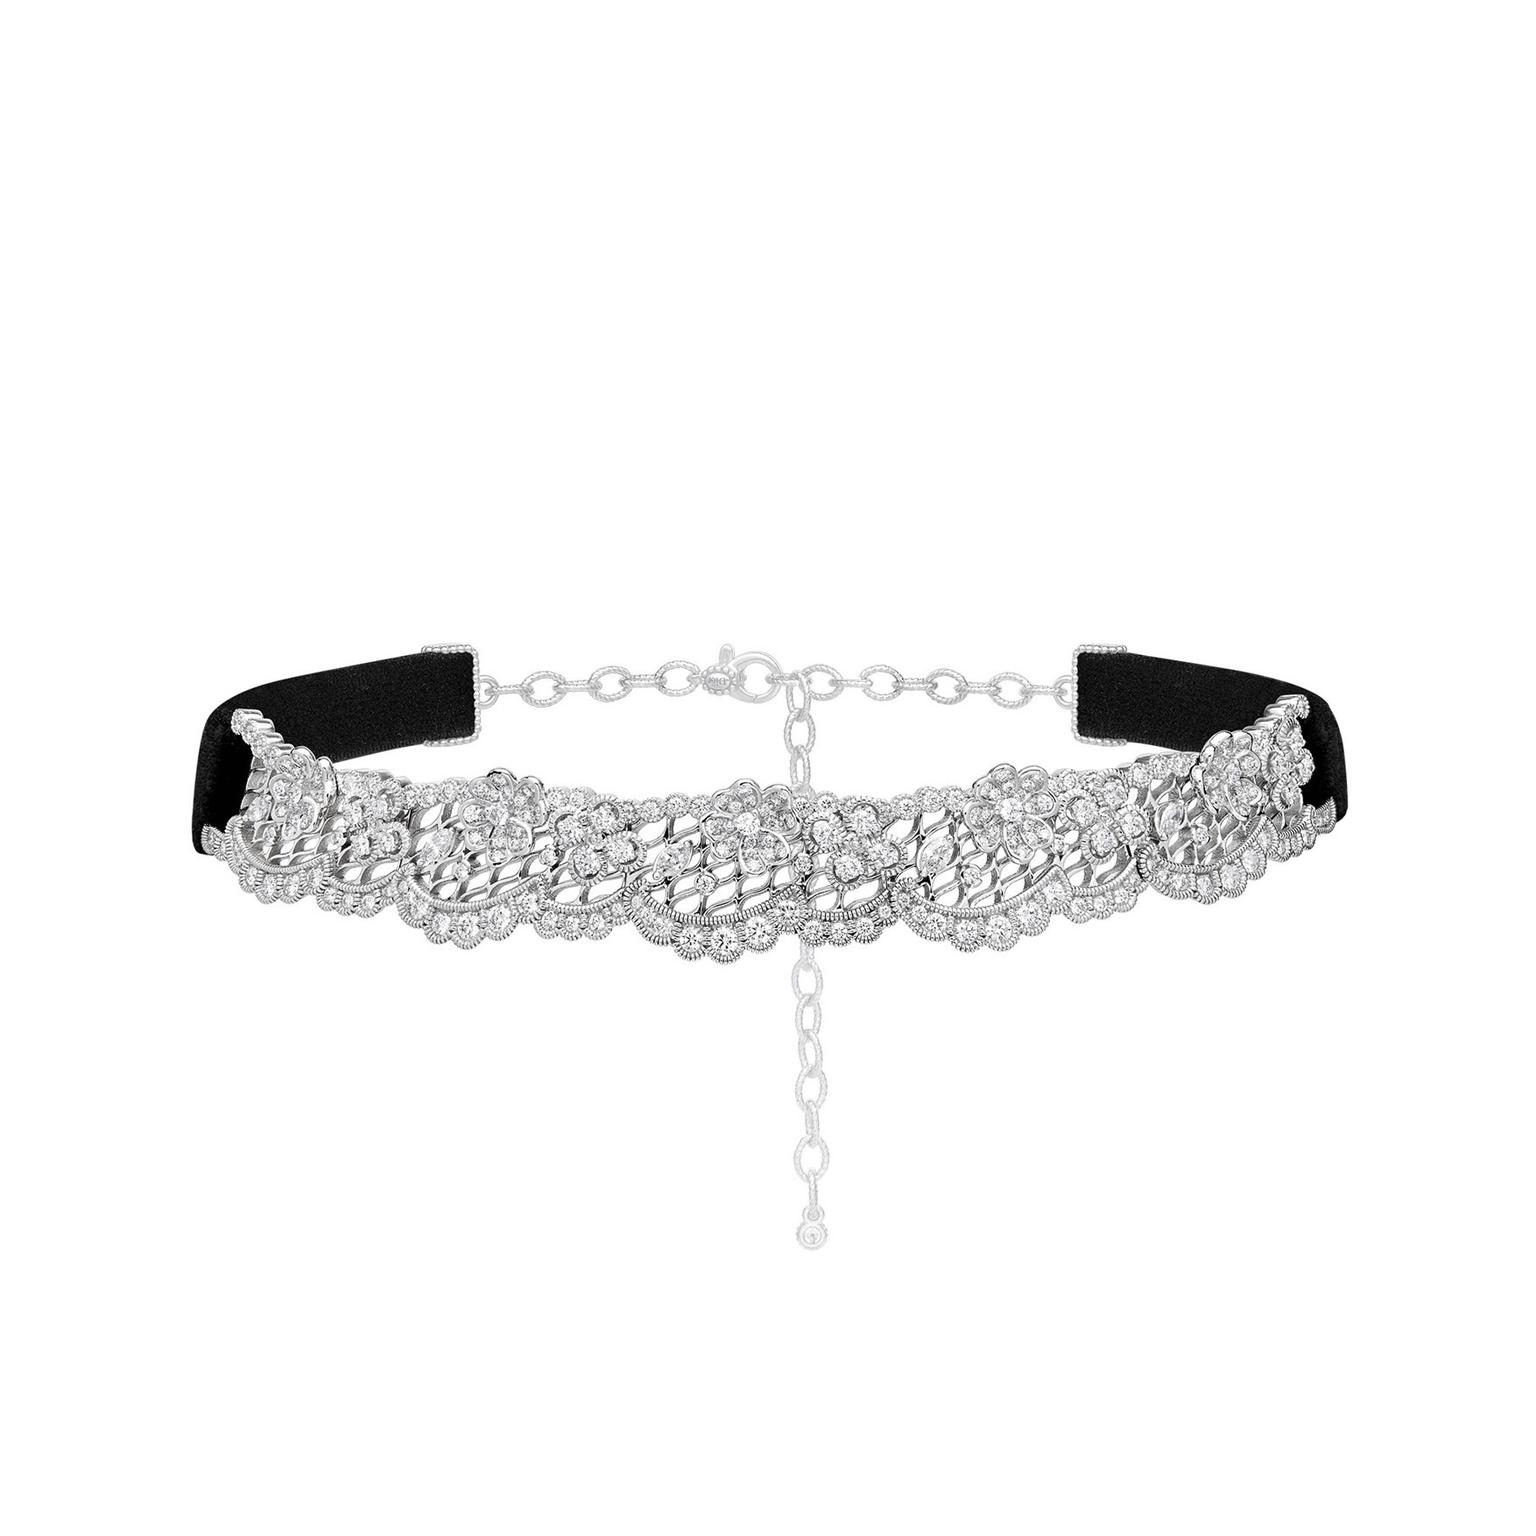 Couture Dior choker by Dior 